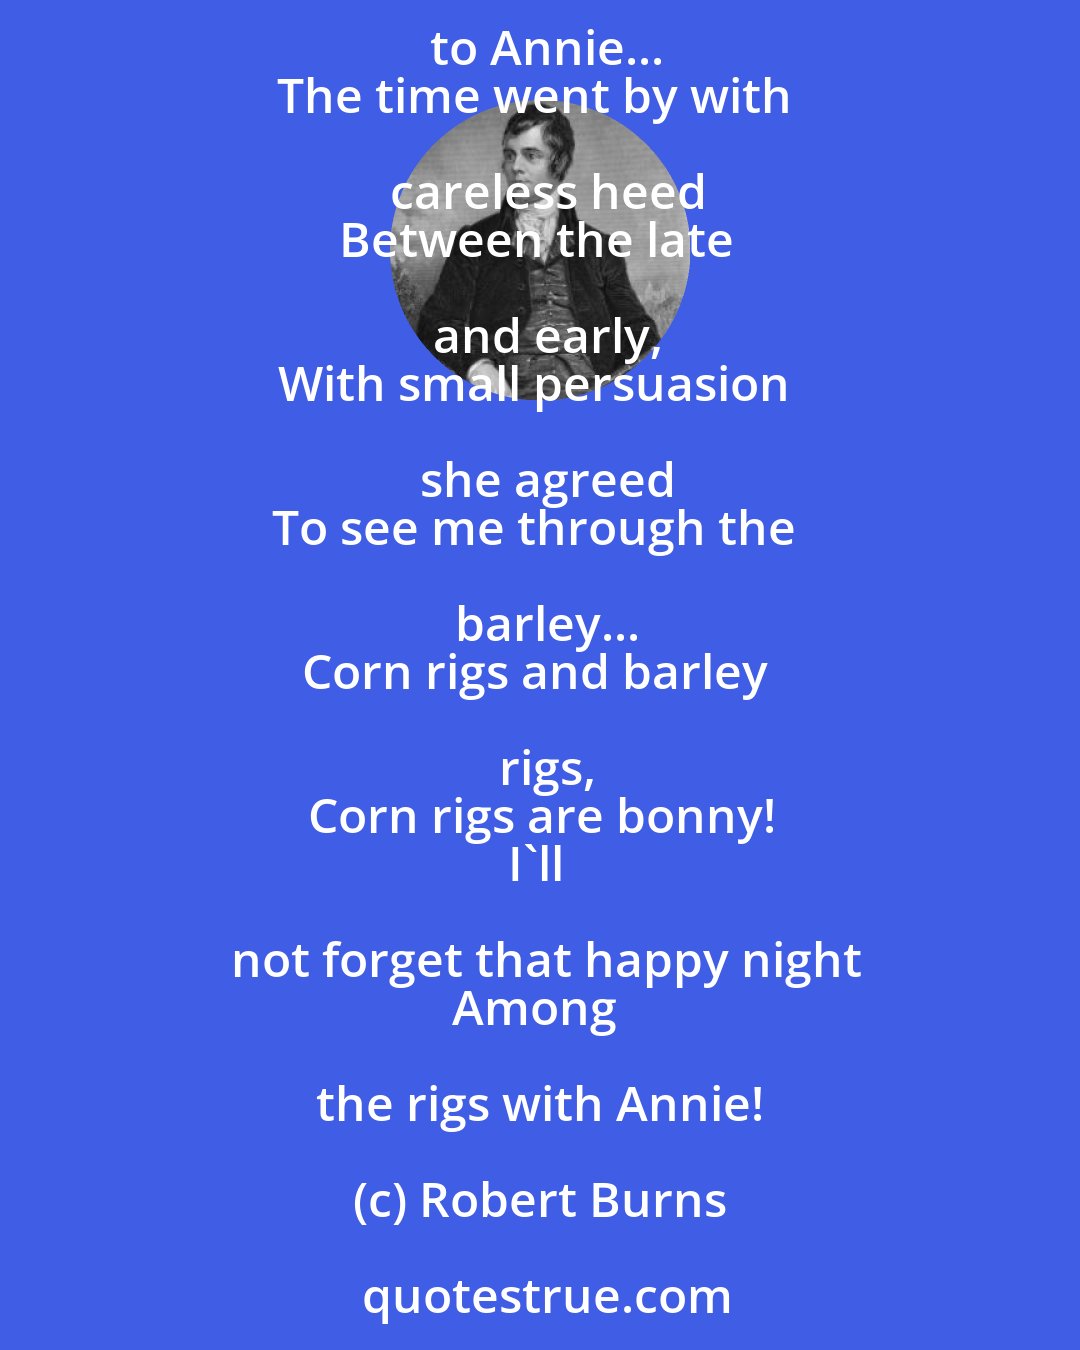 Robert Burns: Once upon a Lammas Night
When corn rigs are bonny,
Beneath the Moon's unclouded light, 
I held awhile to Annie...
The time went by with careless heed
Between the late and early,
With small persuasion she agreed
To see me through the barley...
Corn rigs and barley rigs,
Corn rigs are bonny!
I'll not forget that happy night
Among the rigs with Annie!